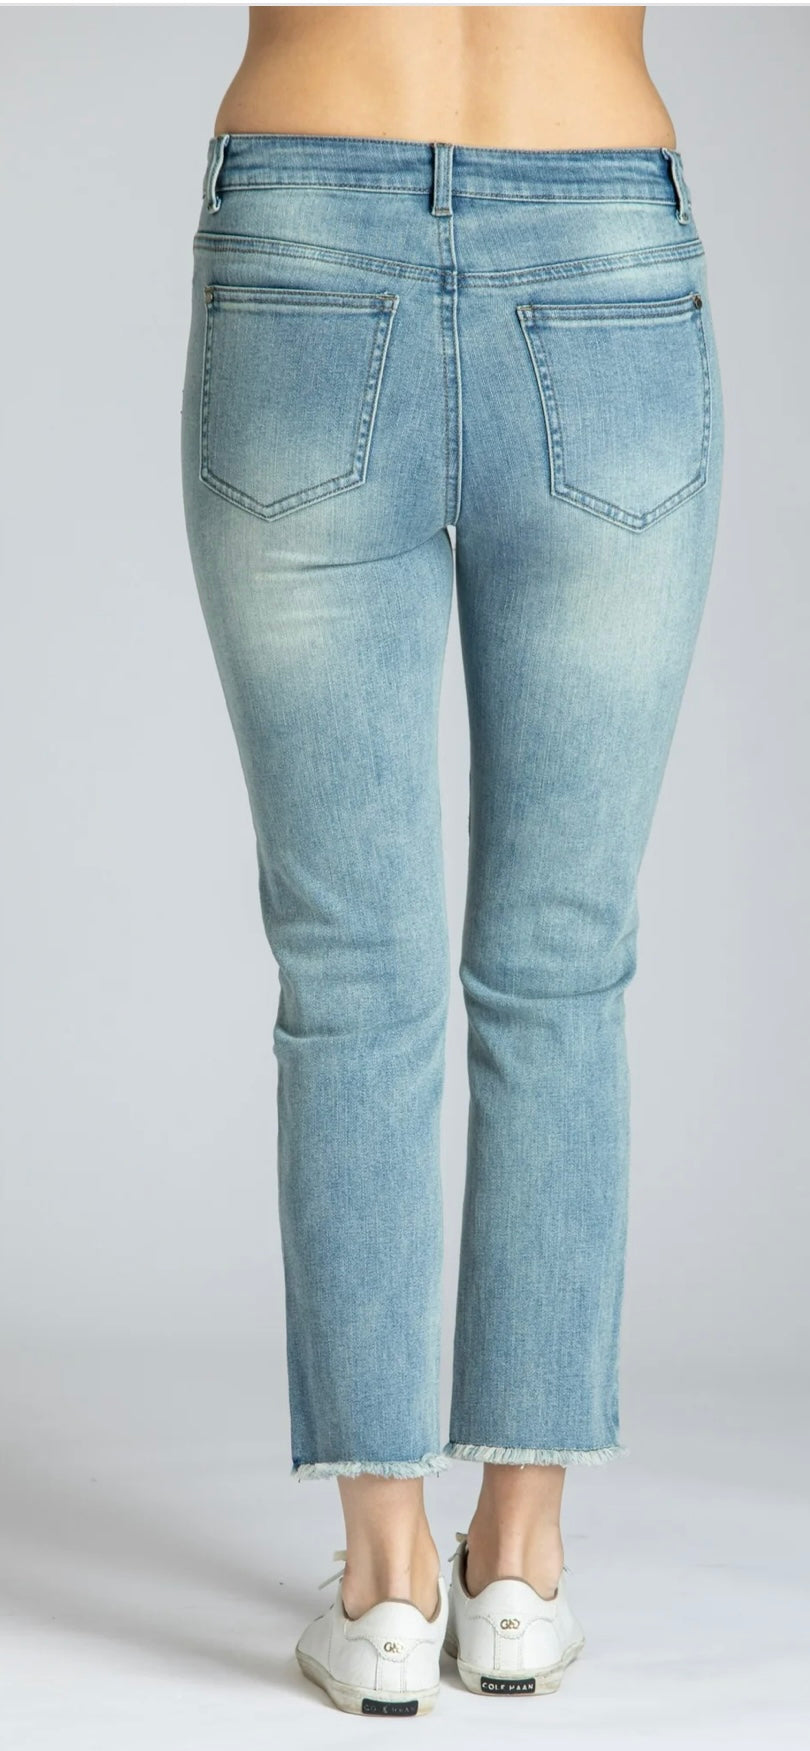 Straight Leg crop jean with floral embroidery - Light Indigo